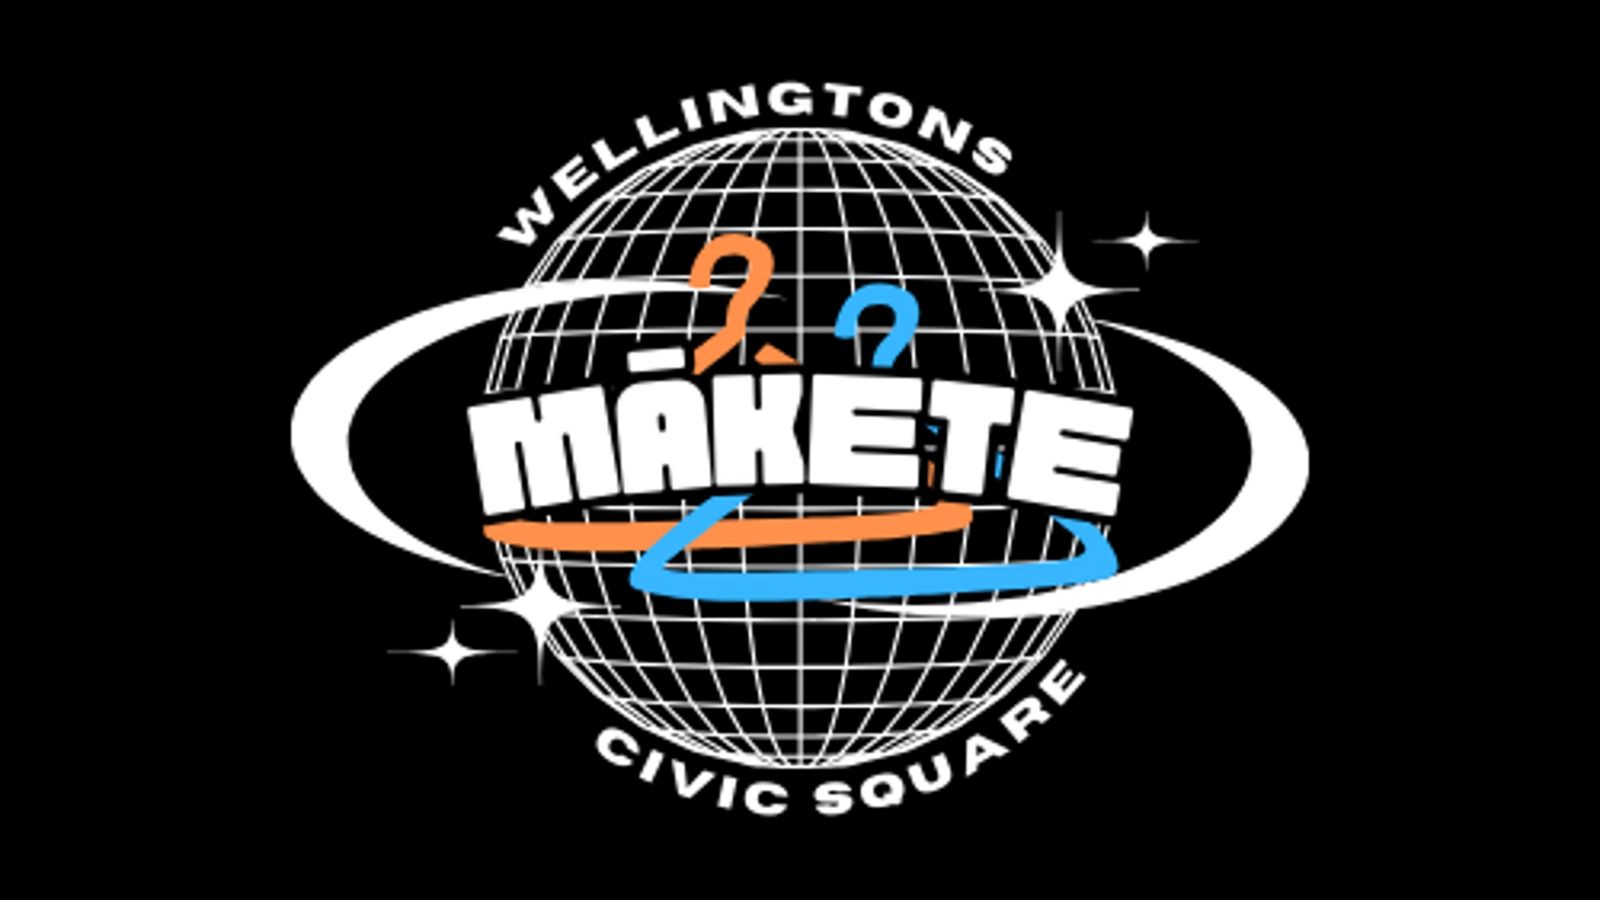 Logo with white global circle, black background and naming the venture (Wellington's Makete)